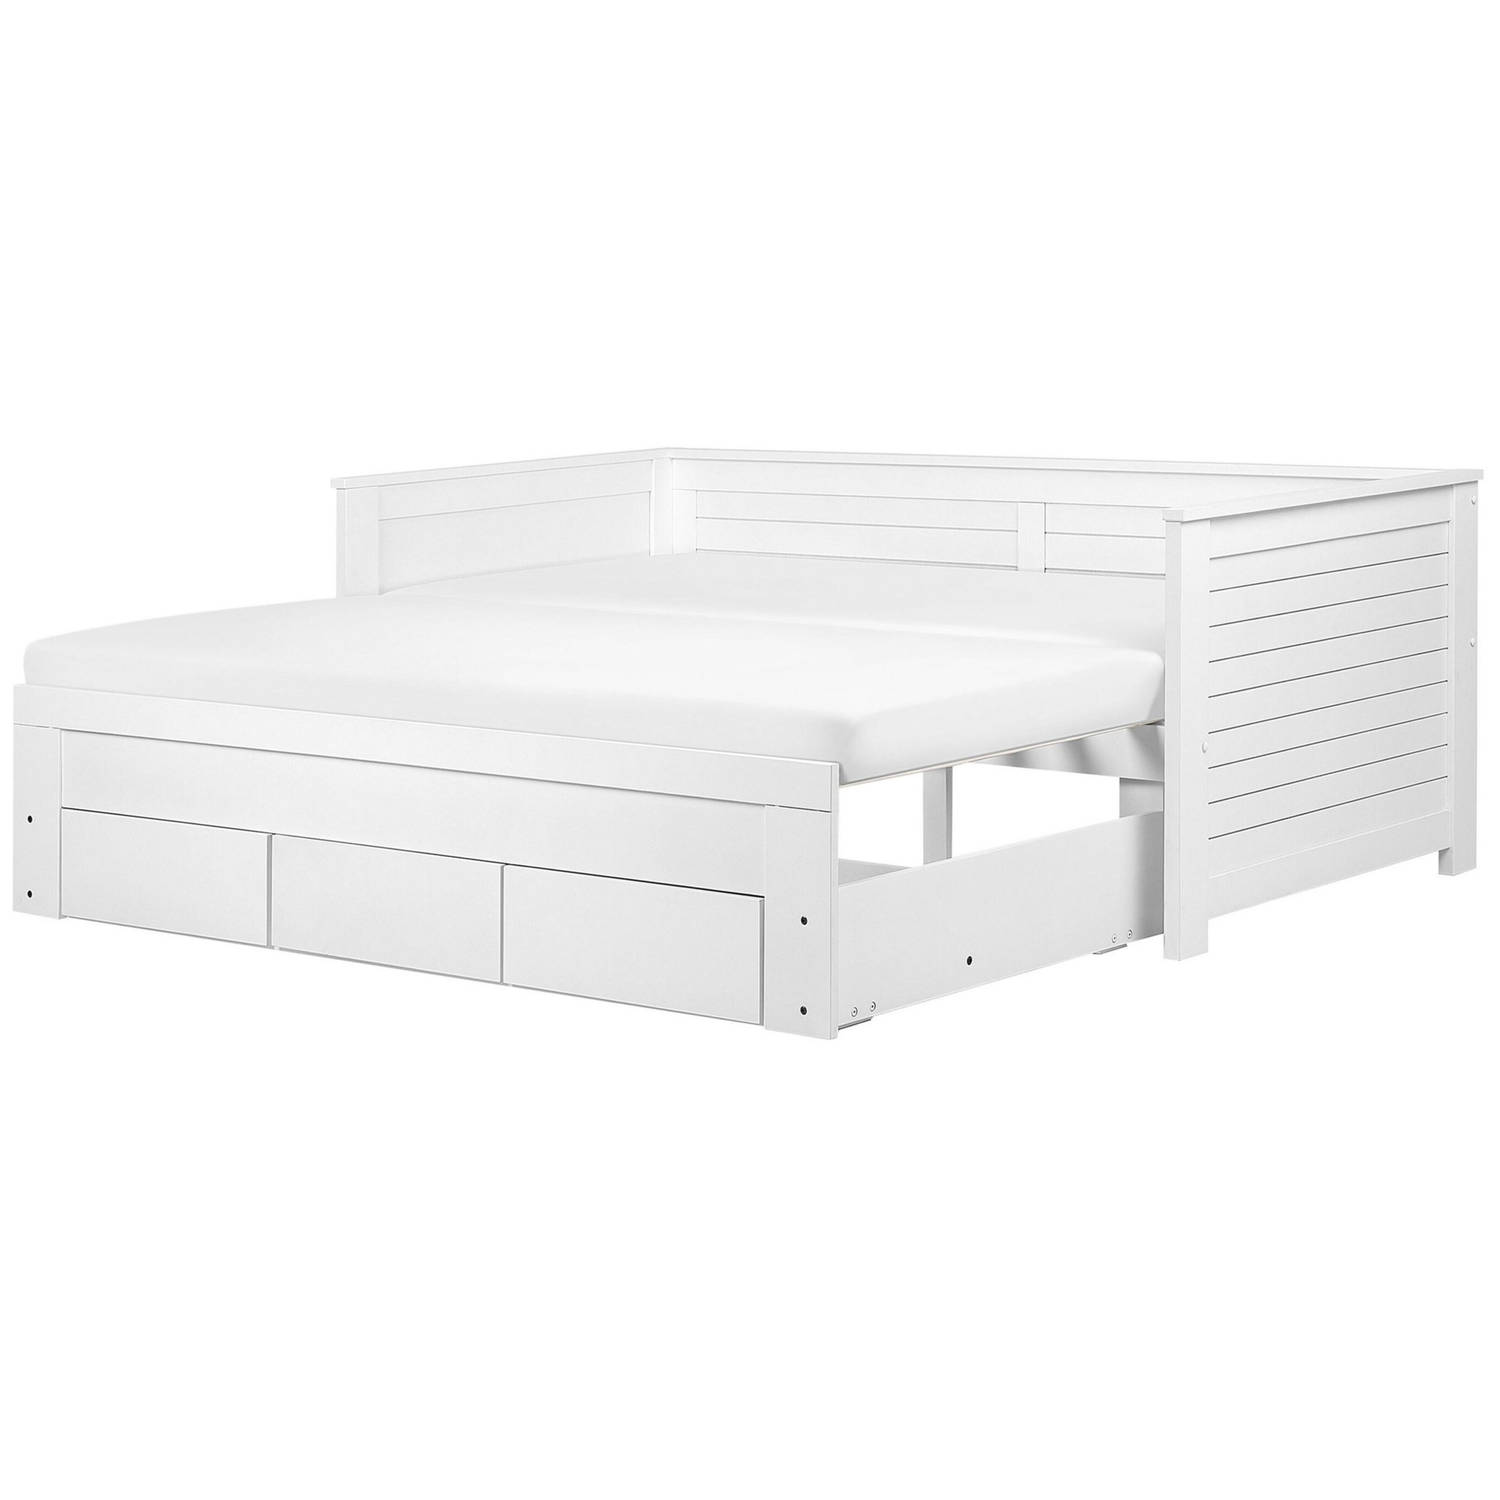 Beliani CAHORS Bed Wit Hout 90x200